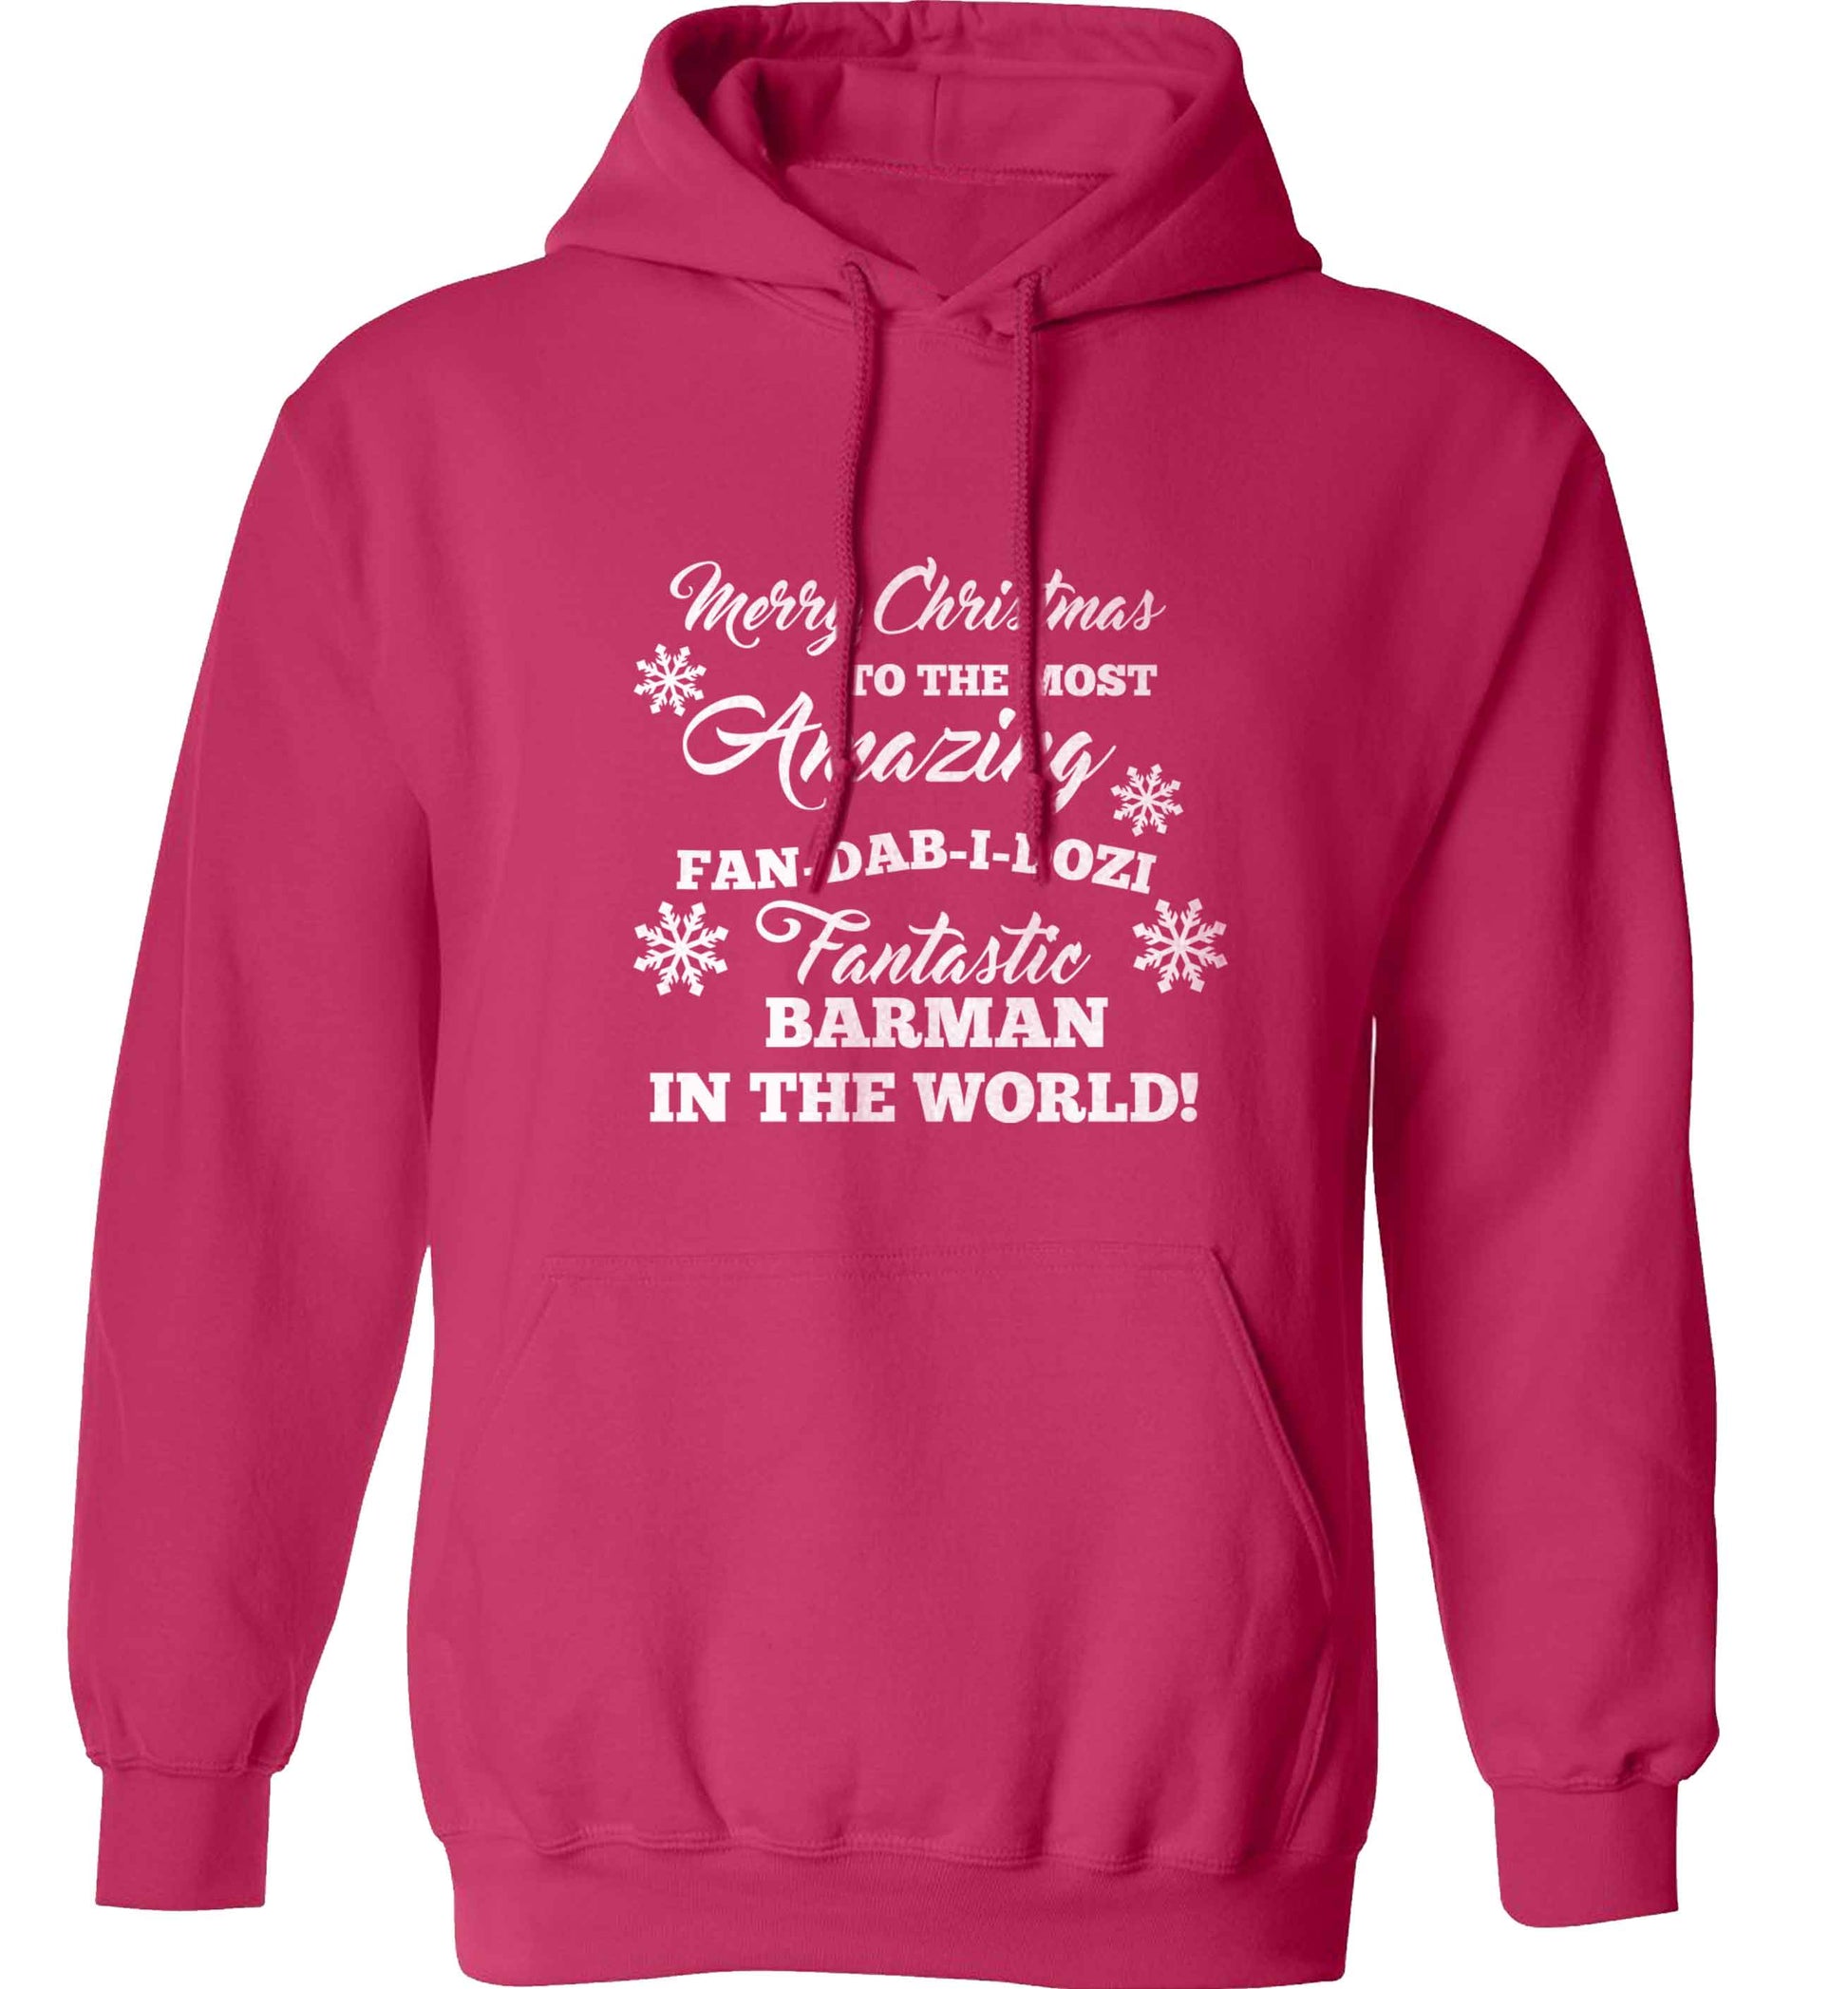 Merry Christmas to the most amazing barman in the world! adults unisex pink hoodie 2XL